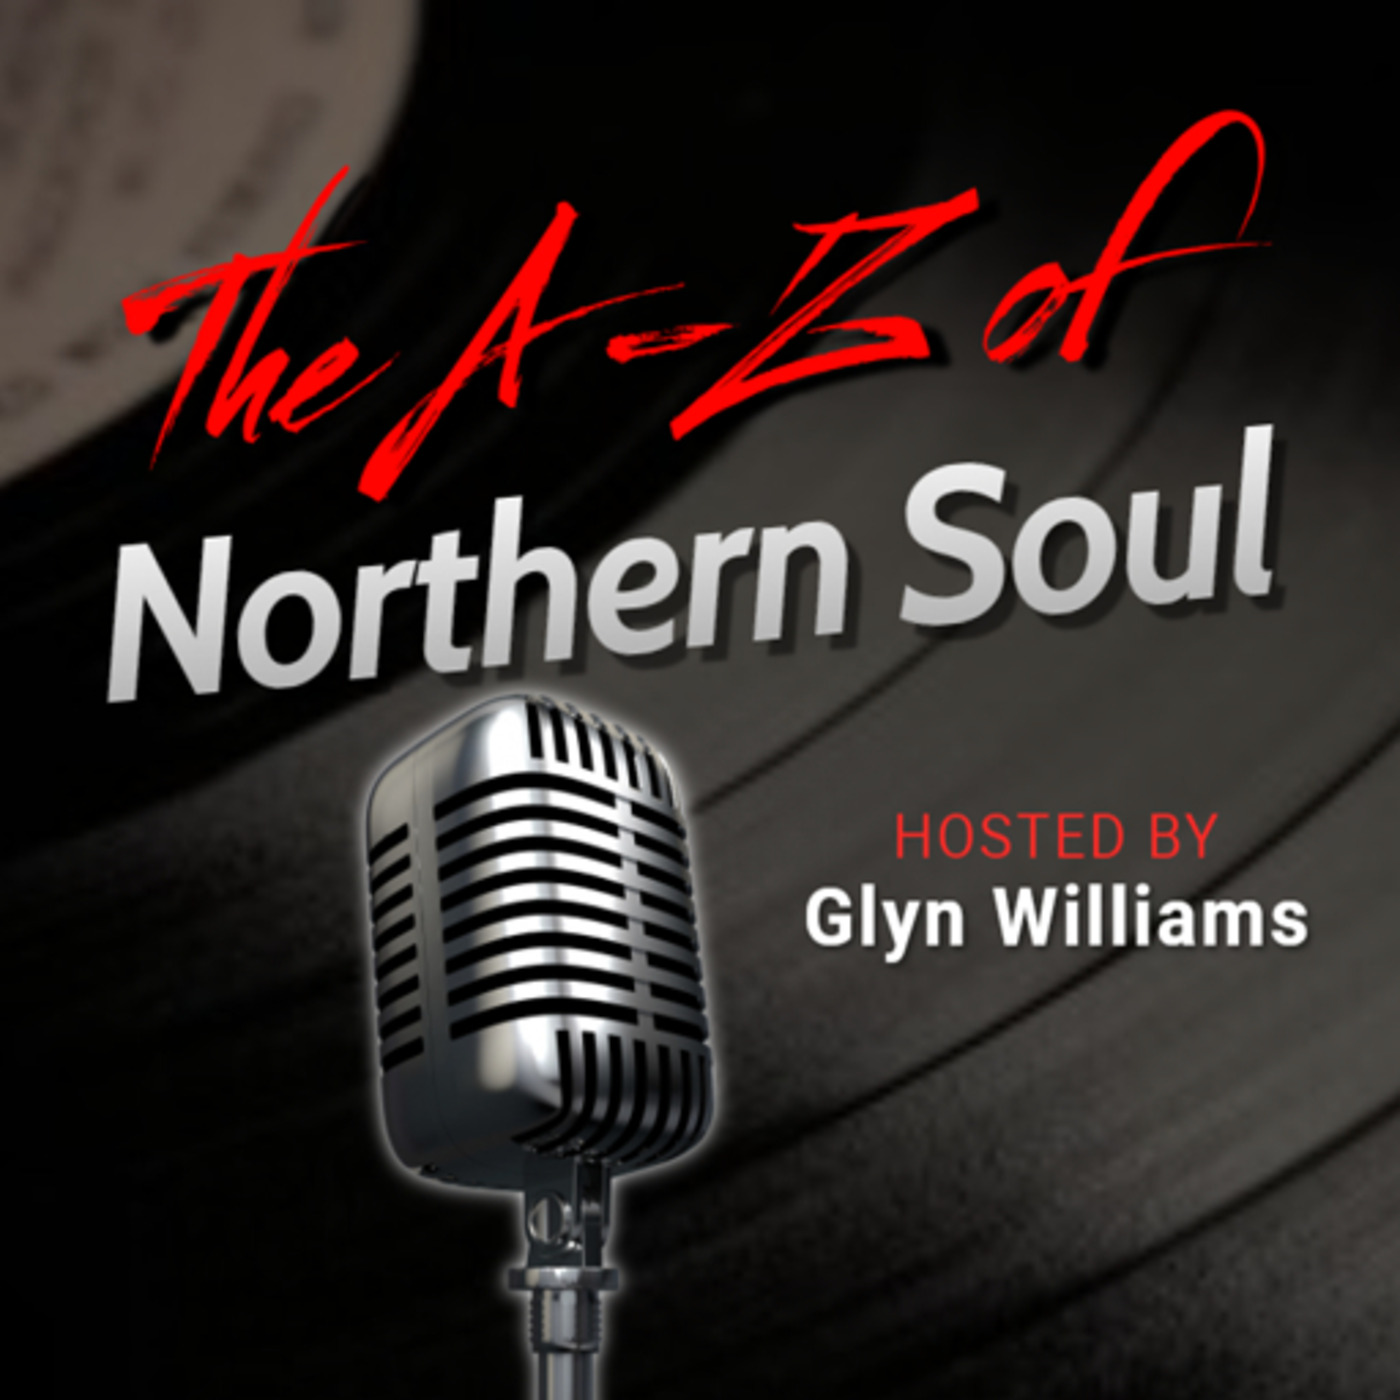 The A-Z of Northern Soul E001